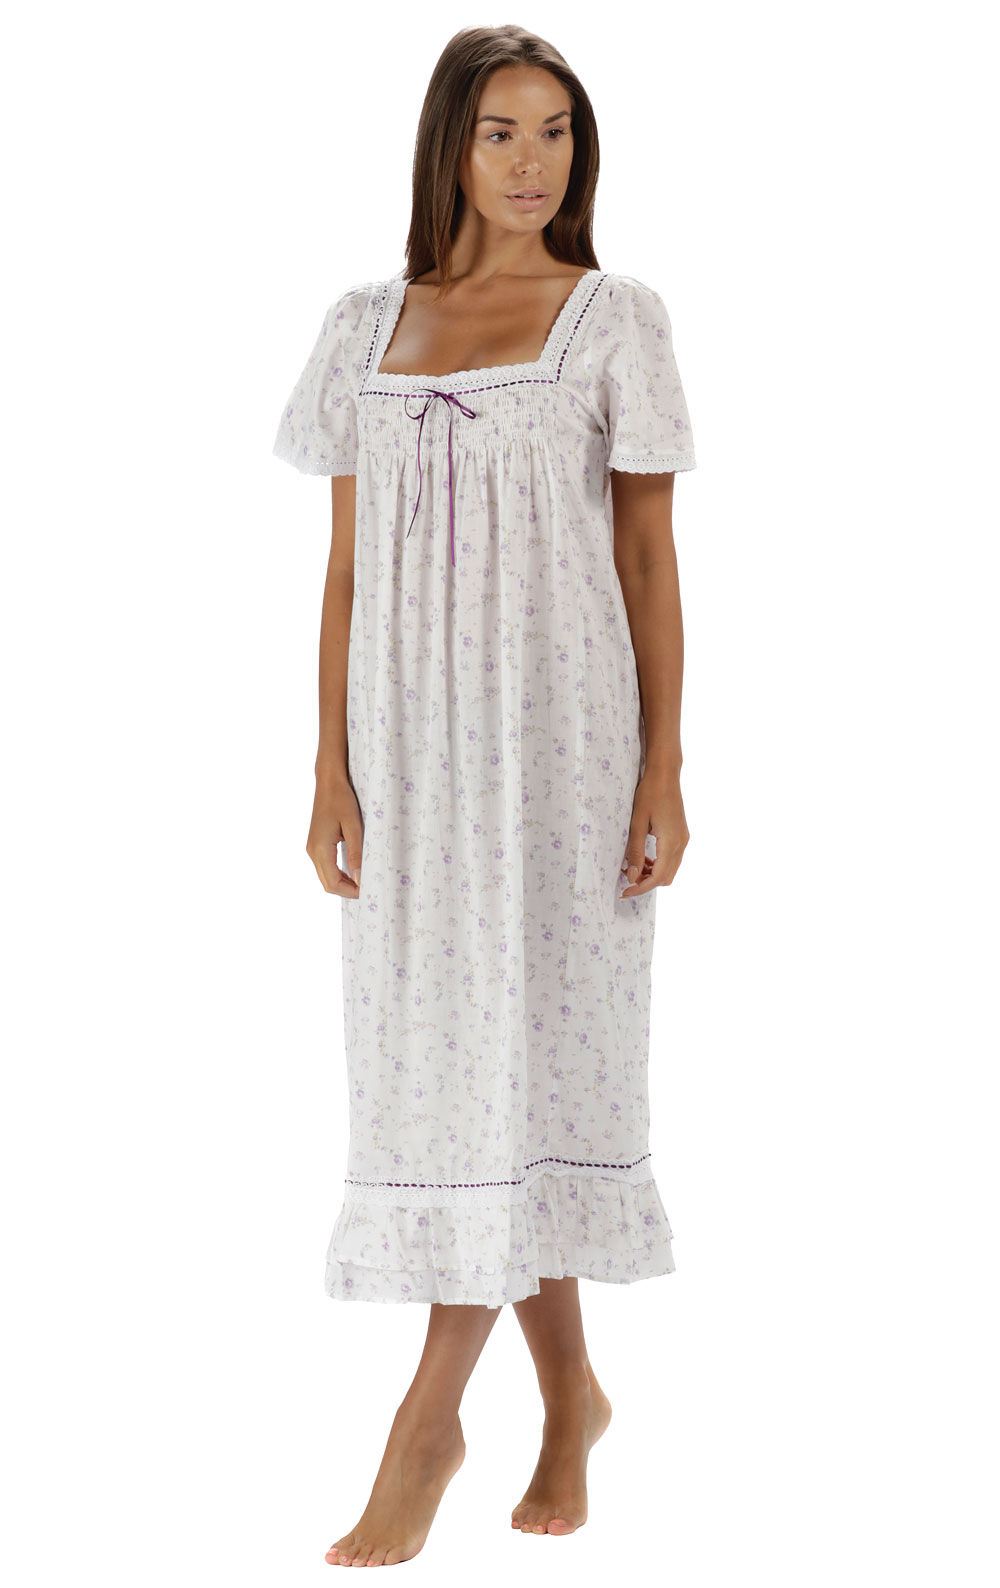 100% Cotton Nightgown Womens Victorian Nightie Plus Size Nightdress Evelyn Lilac 